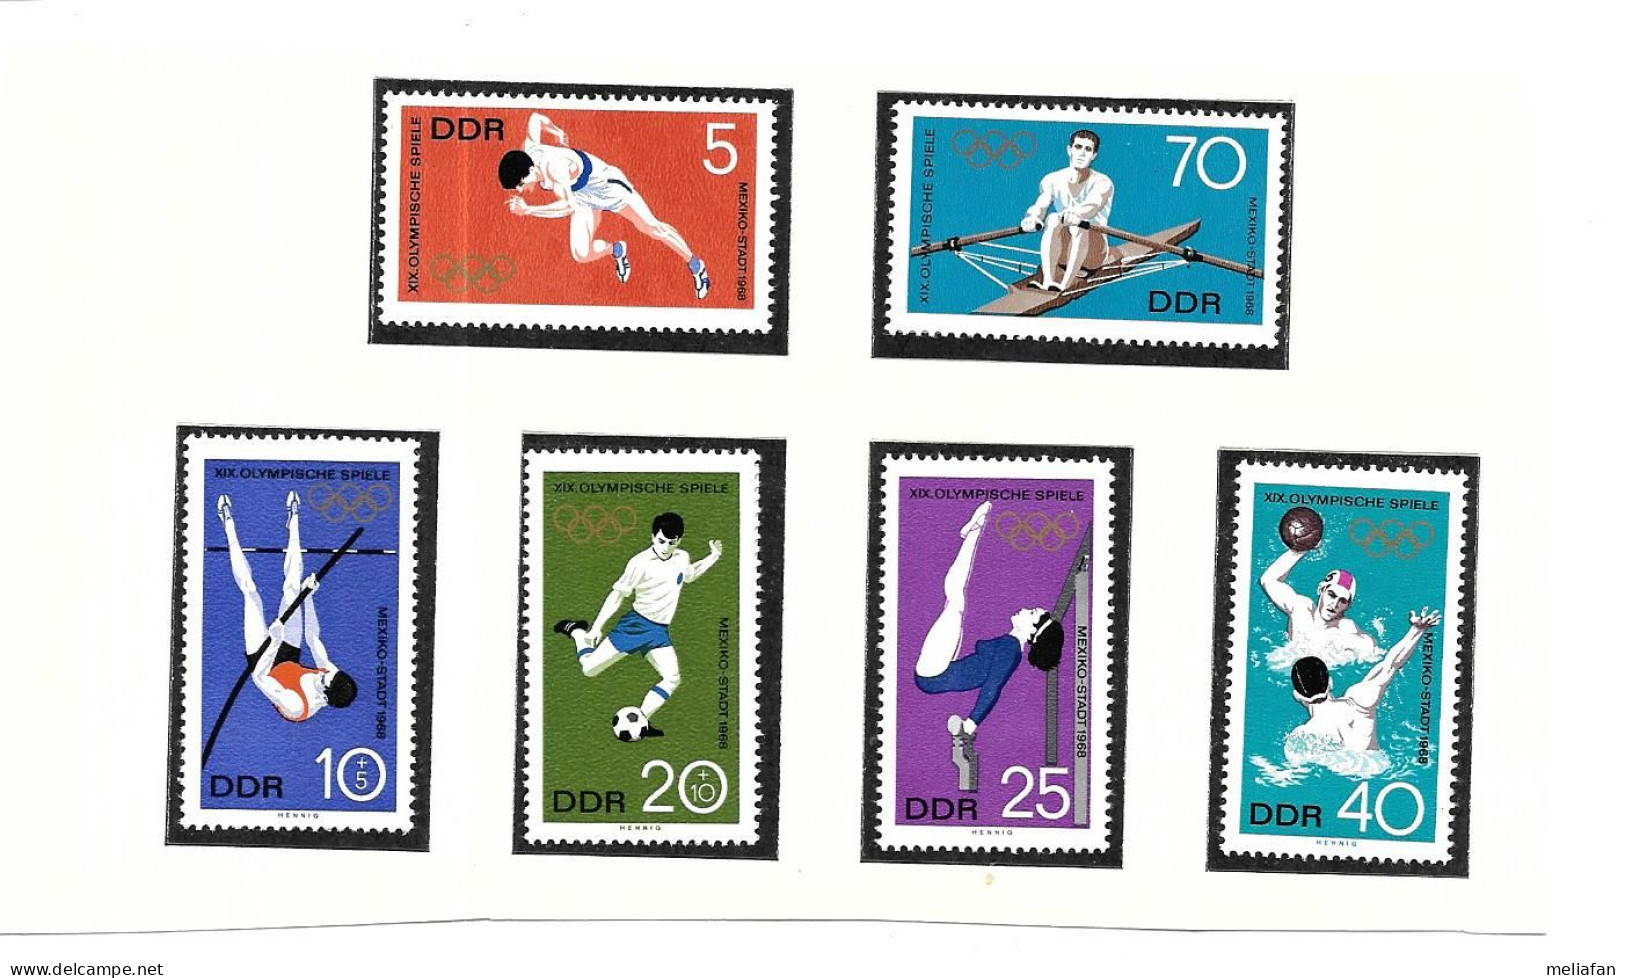 DF96 - TIMBRES POSTE DDR - JEUX OLYMPIQUES MEXICO - AVIRON - FOOTBALL - WATER POLO - GYMNASTIQUE - ATHLETISME - Ete 1968: Mexico